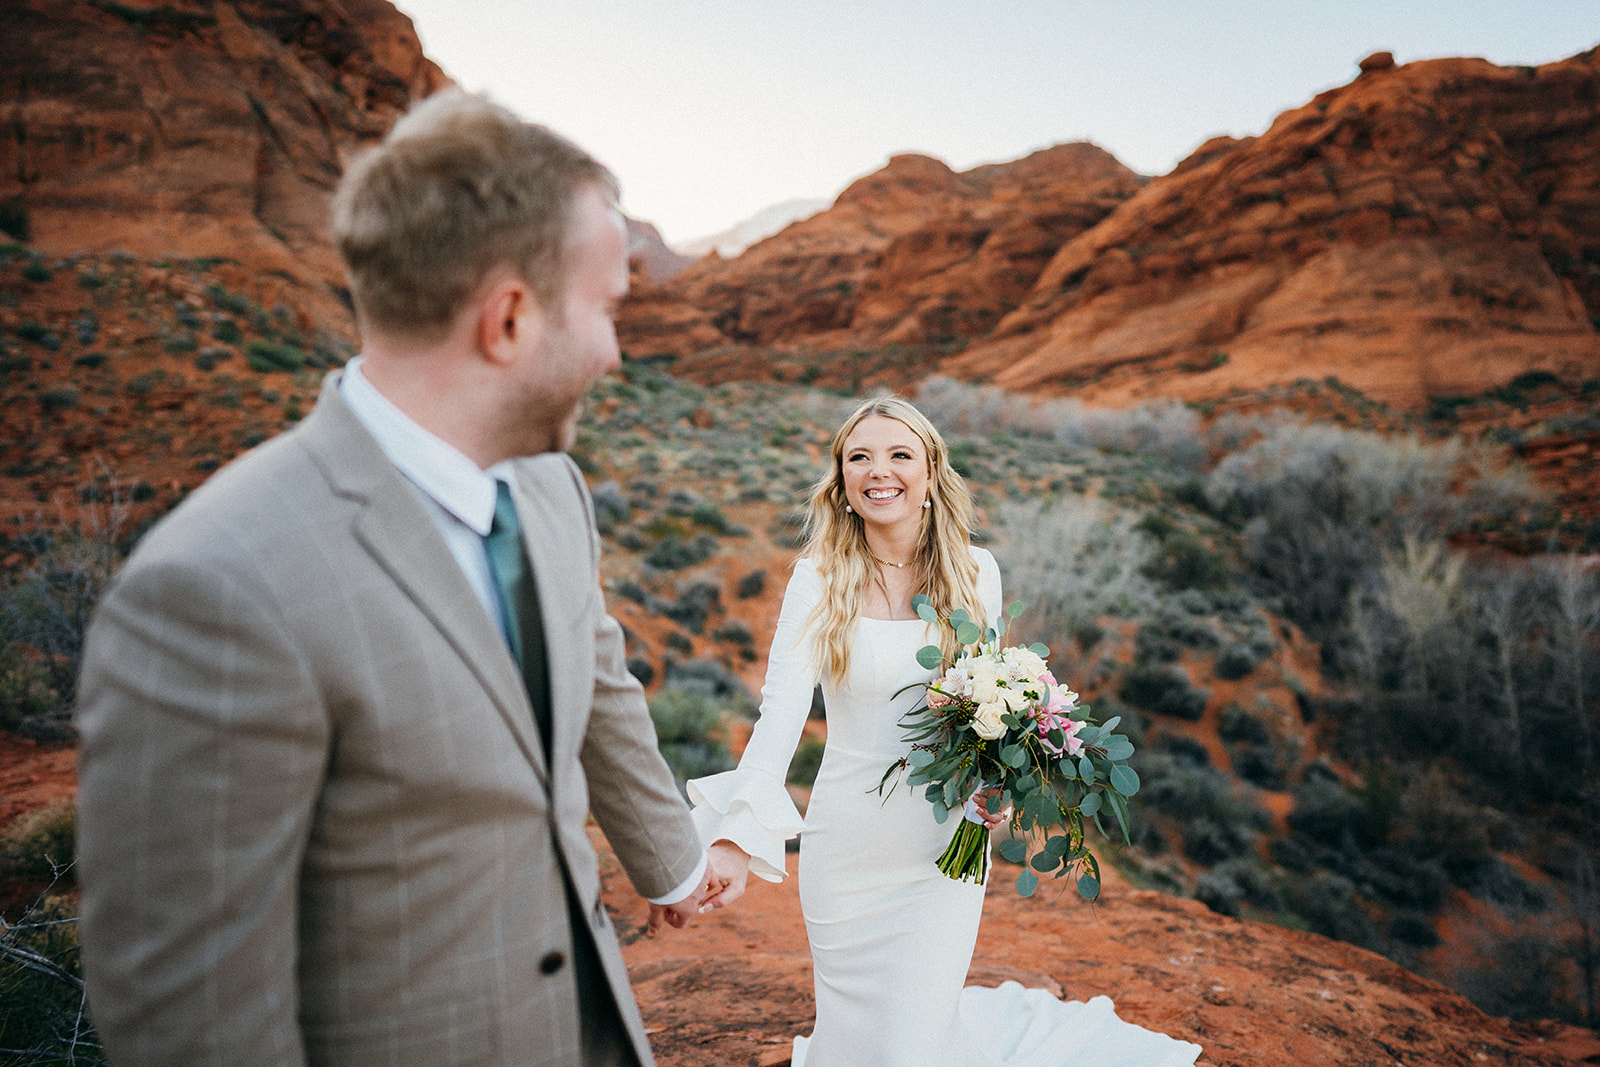 Wedding photos in the red rock cliffs of Southern Utah.